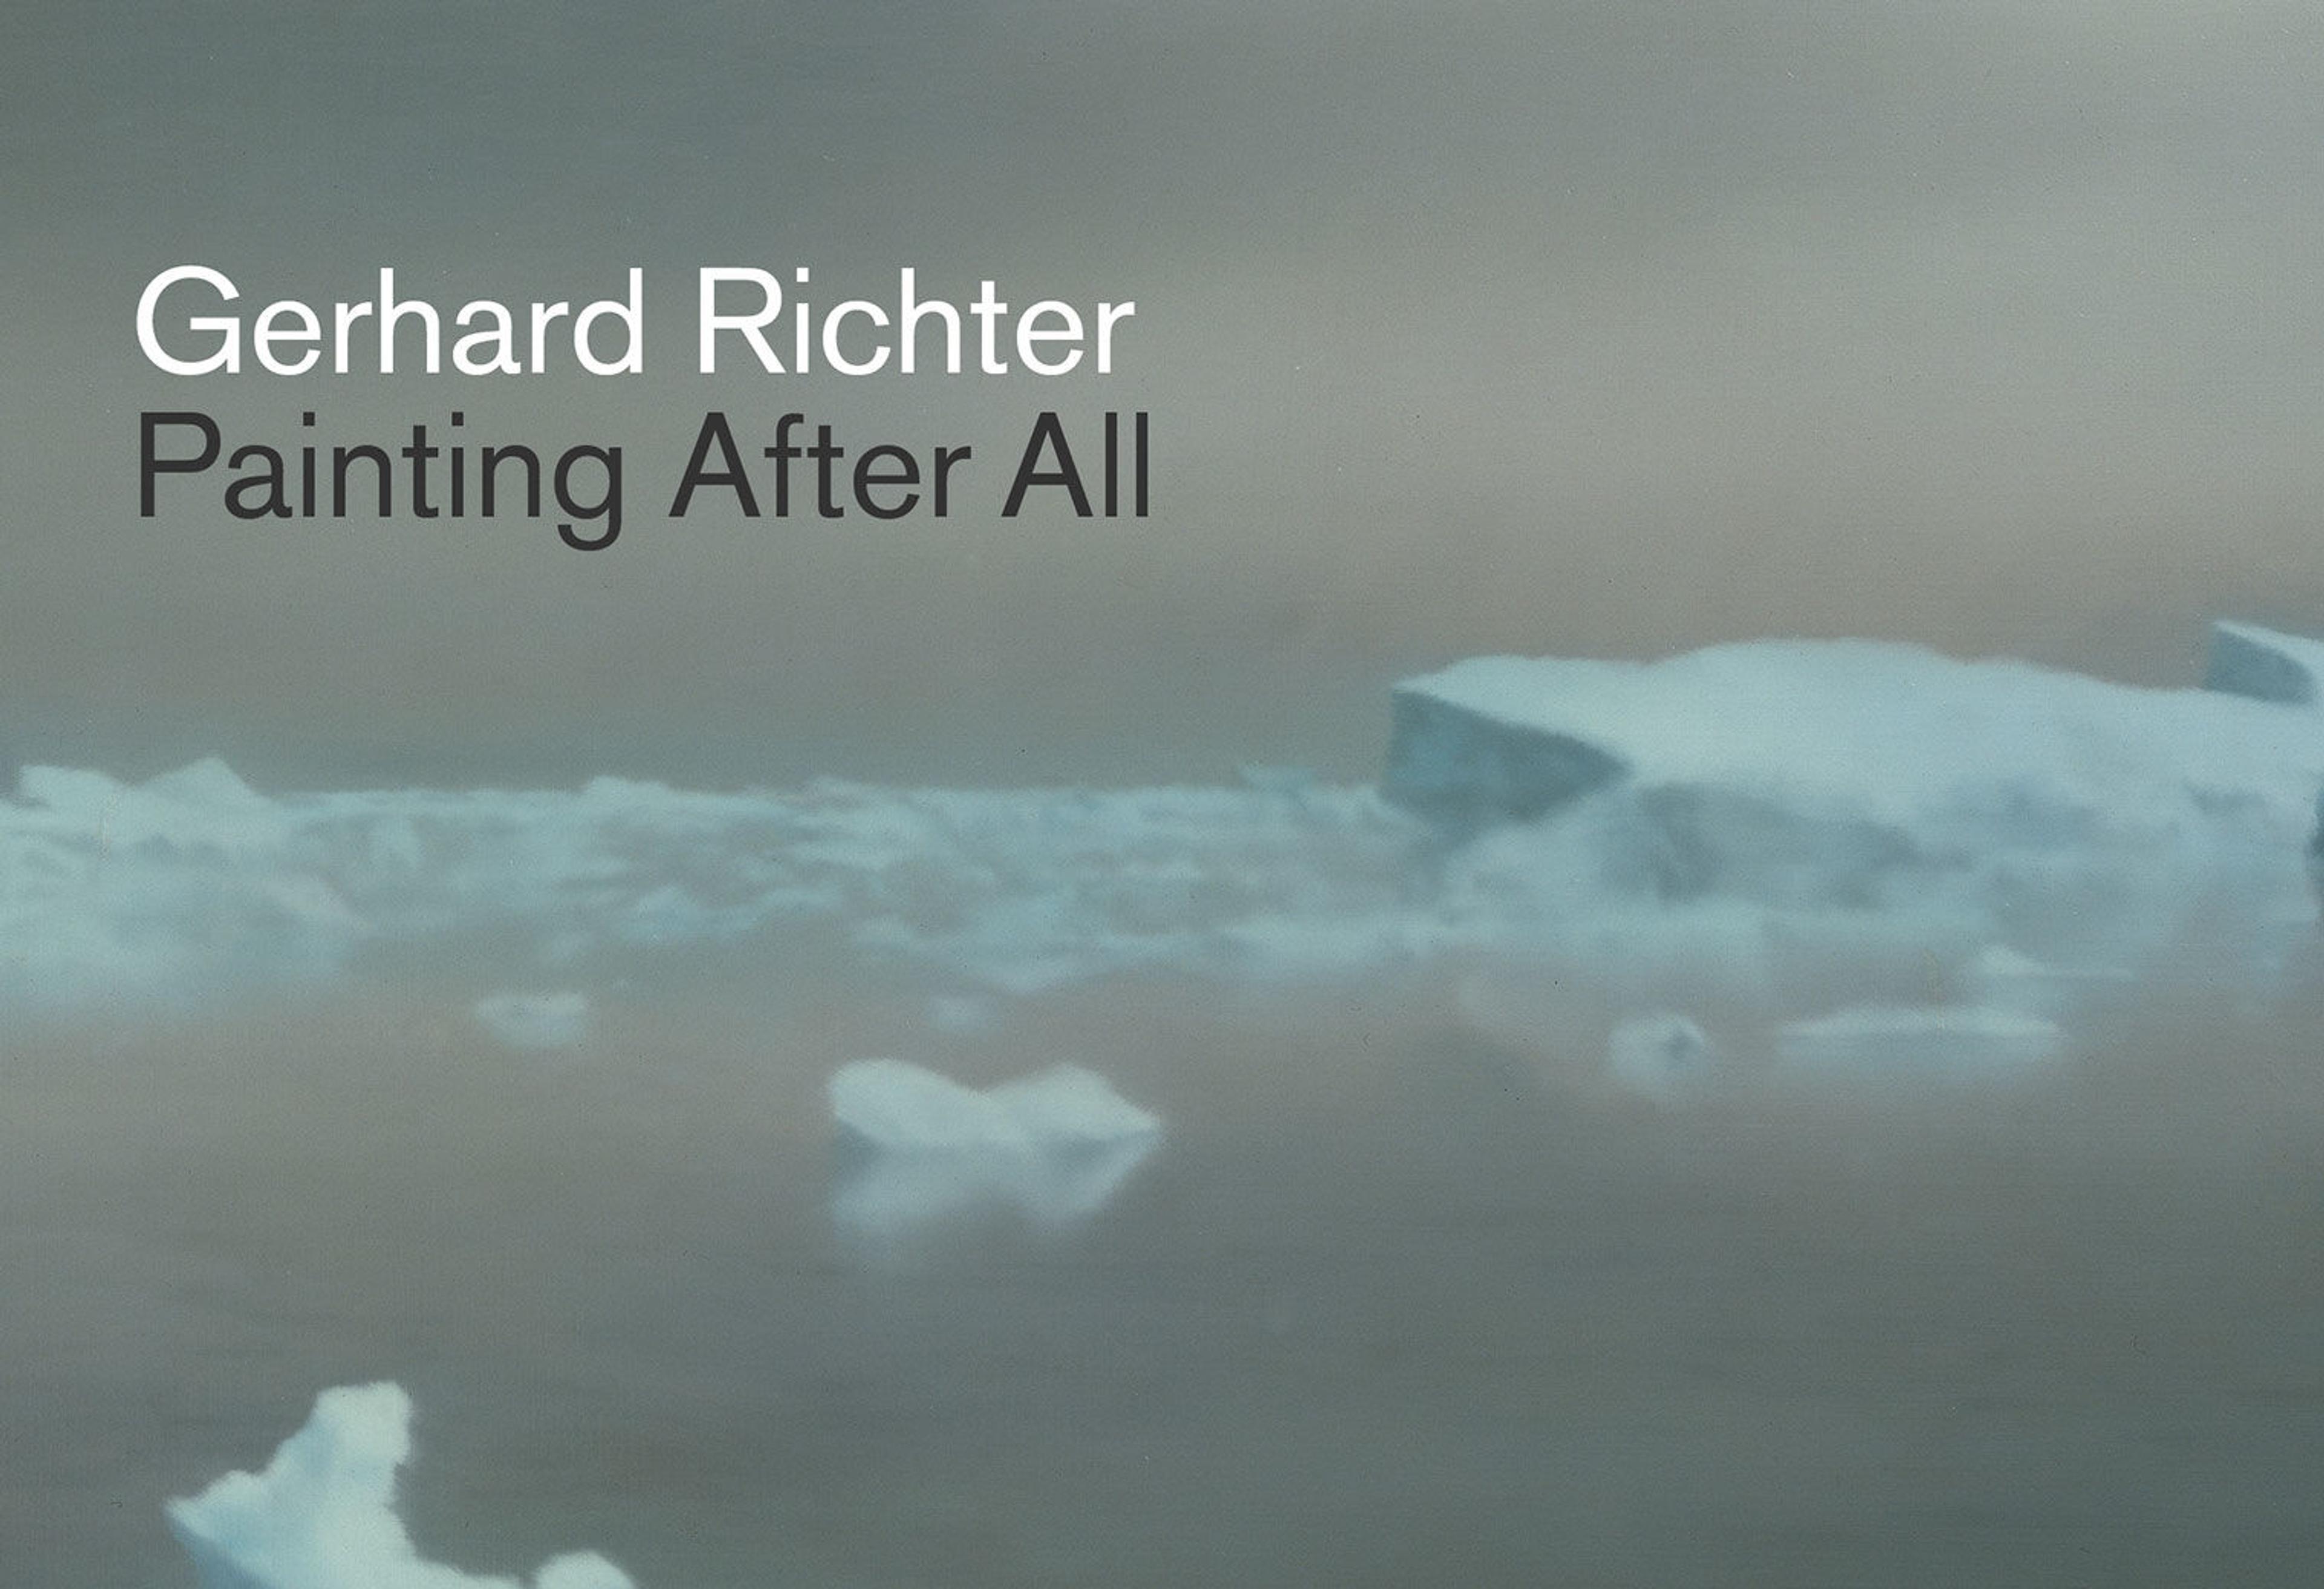 Exhibition teaser for Gerhard Richter: Painting After All, with black and white text over a detail of one of Richter's paintings featuring floating ice and icebergs